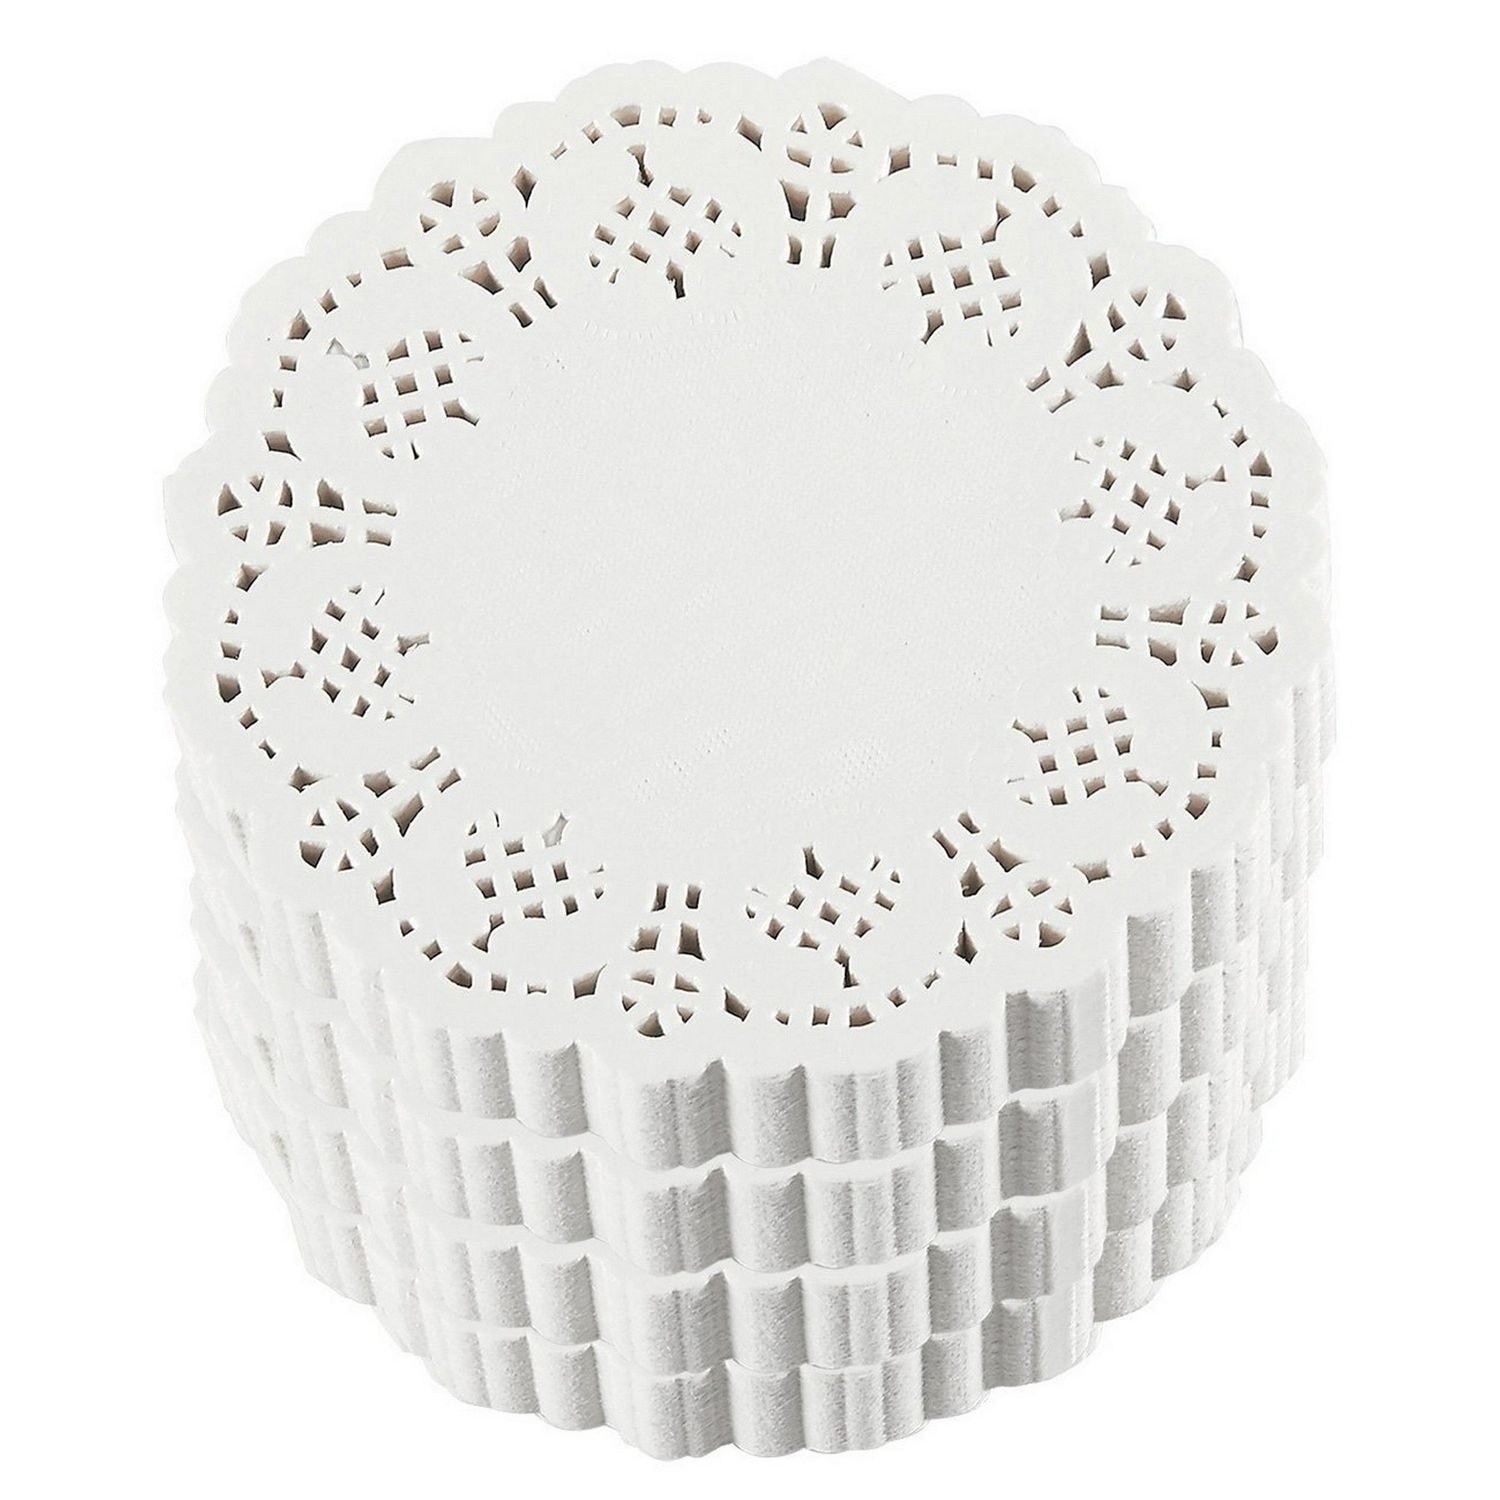 90 Pack Lace Paper Doilies Assorted Sizes White Round Paper Doilies for Food